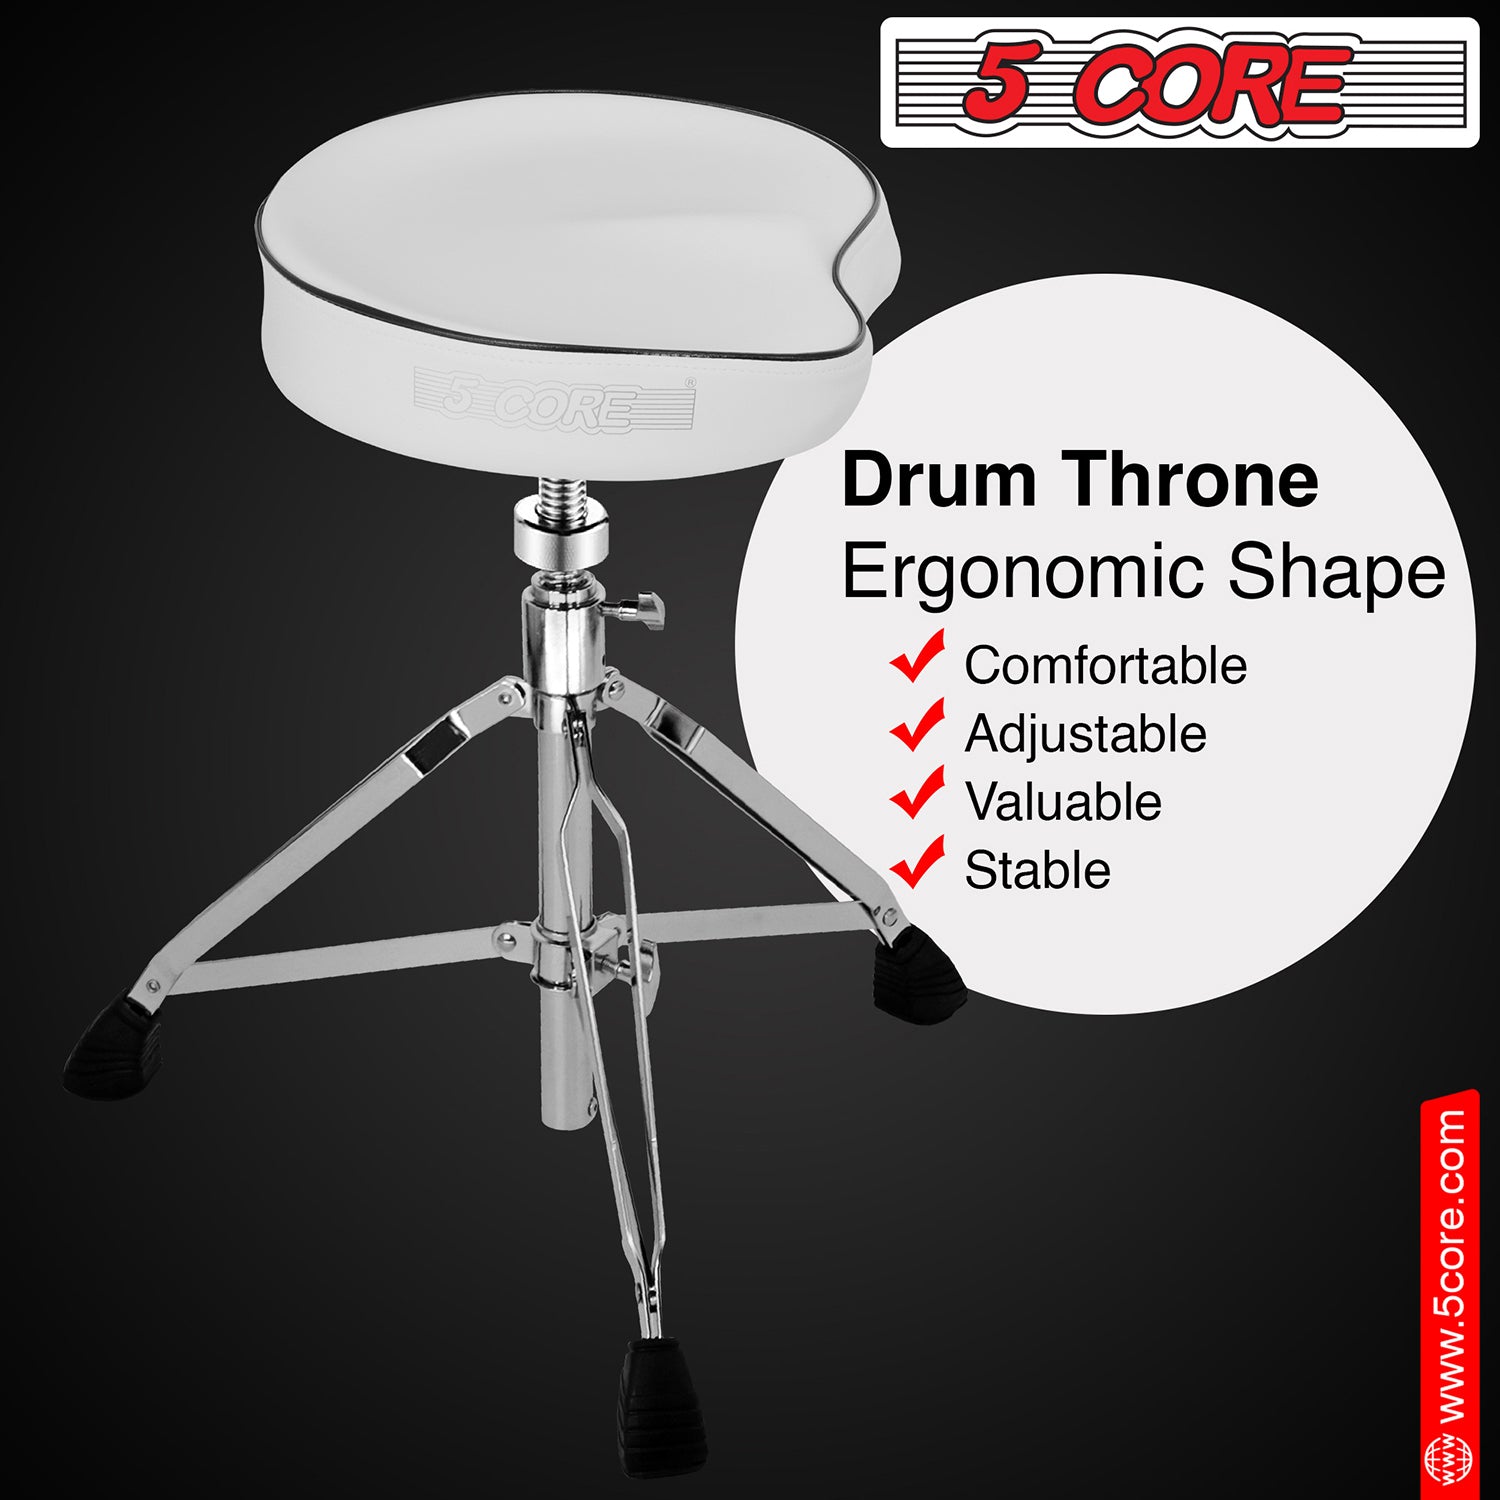 5 Core Heavy-Duty Music Stool: Sturdy construction with cushioned seat, suitable for long sessions.